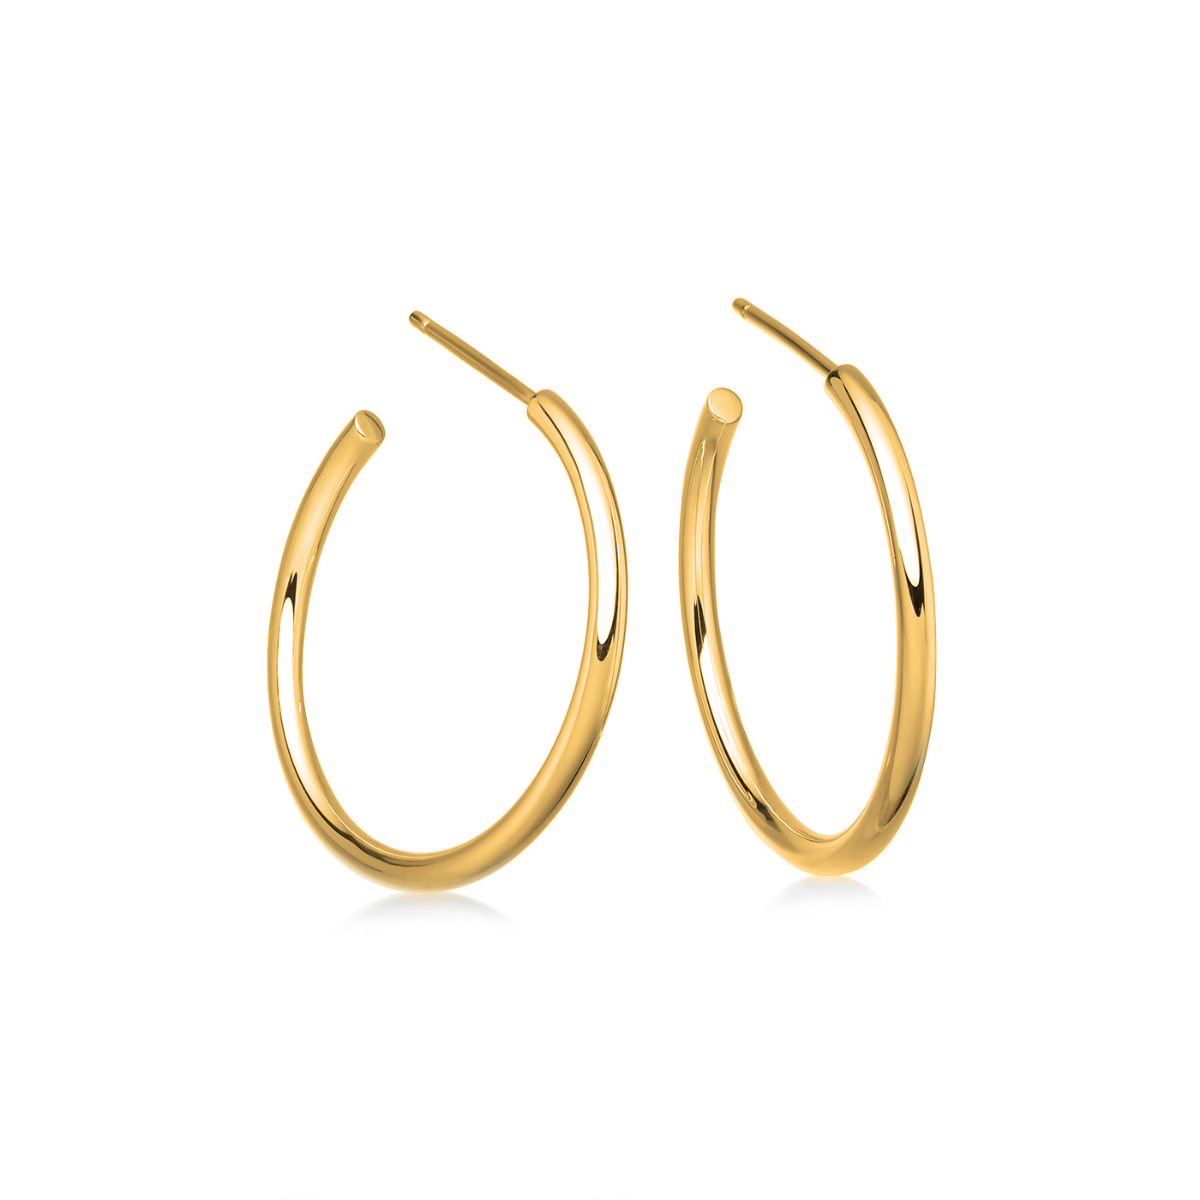 Gold Plated and Silver Hoop Earrings - 30mm | Hersey & Son Silversmiths